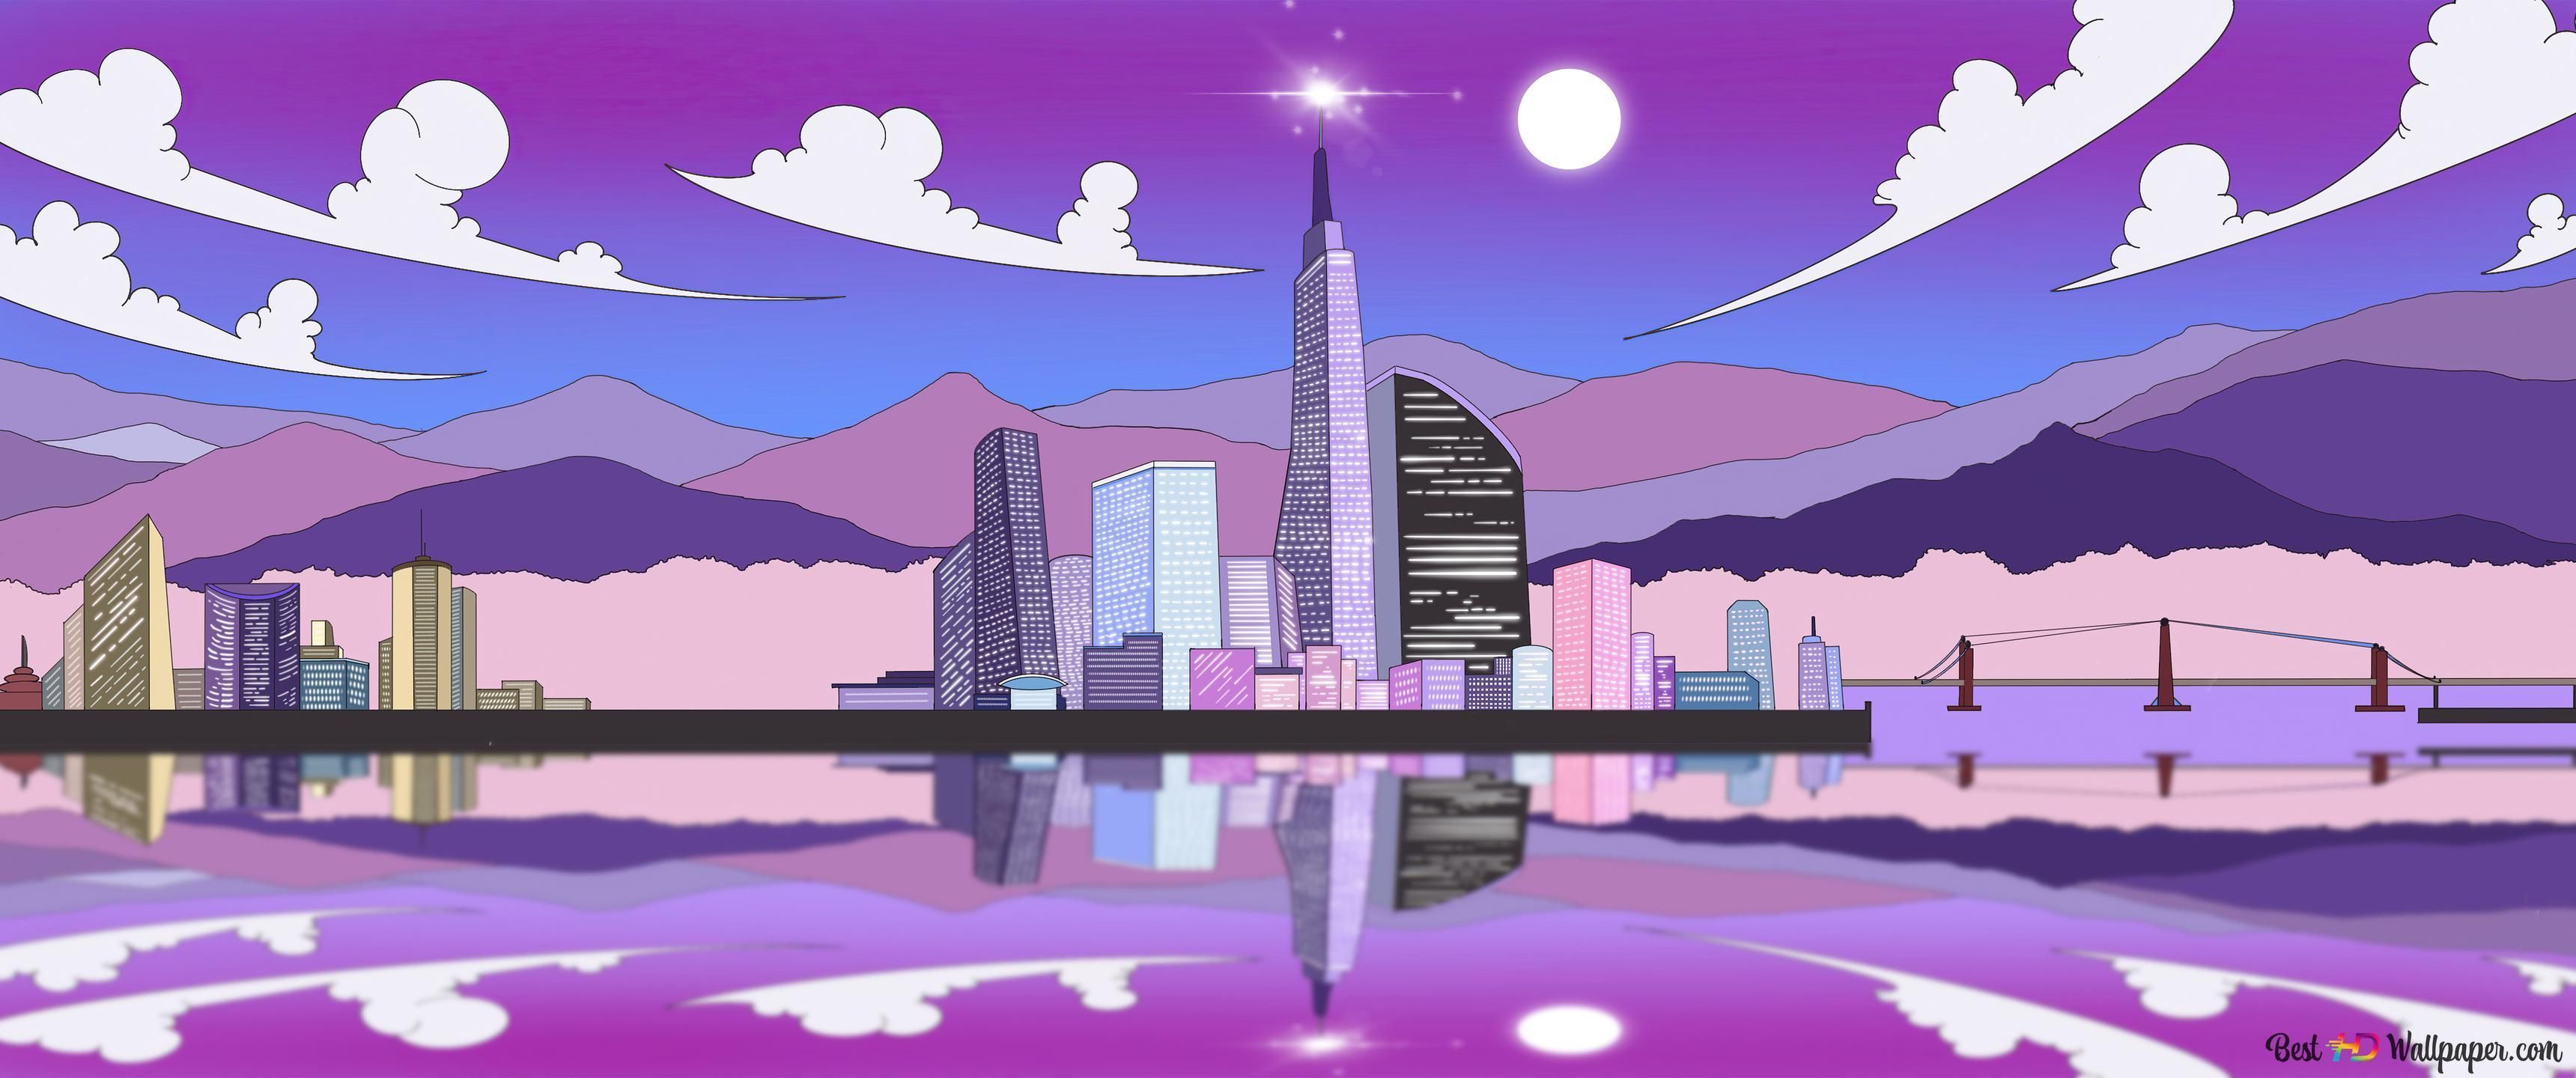 A cartoon city with mountains and water in the background - 3440x1440